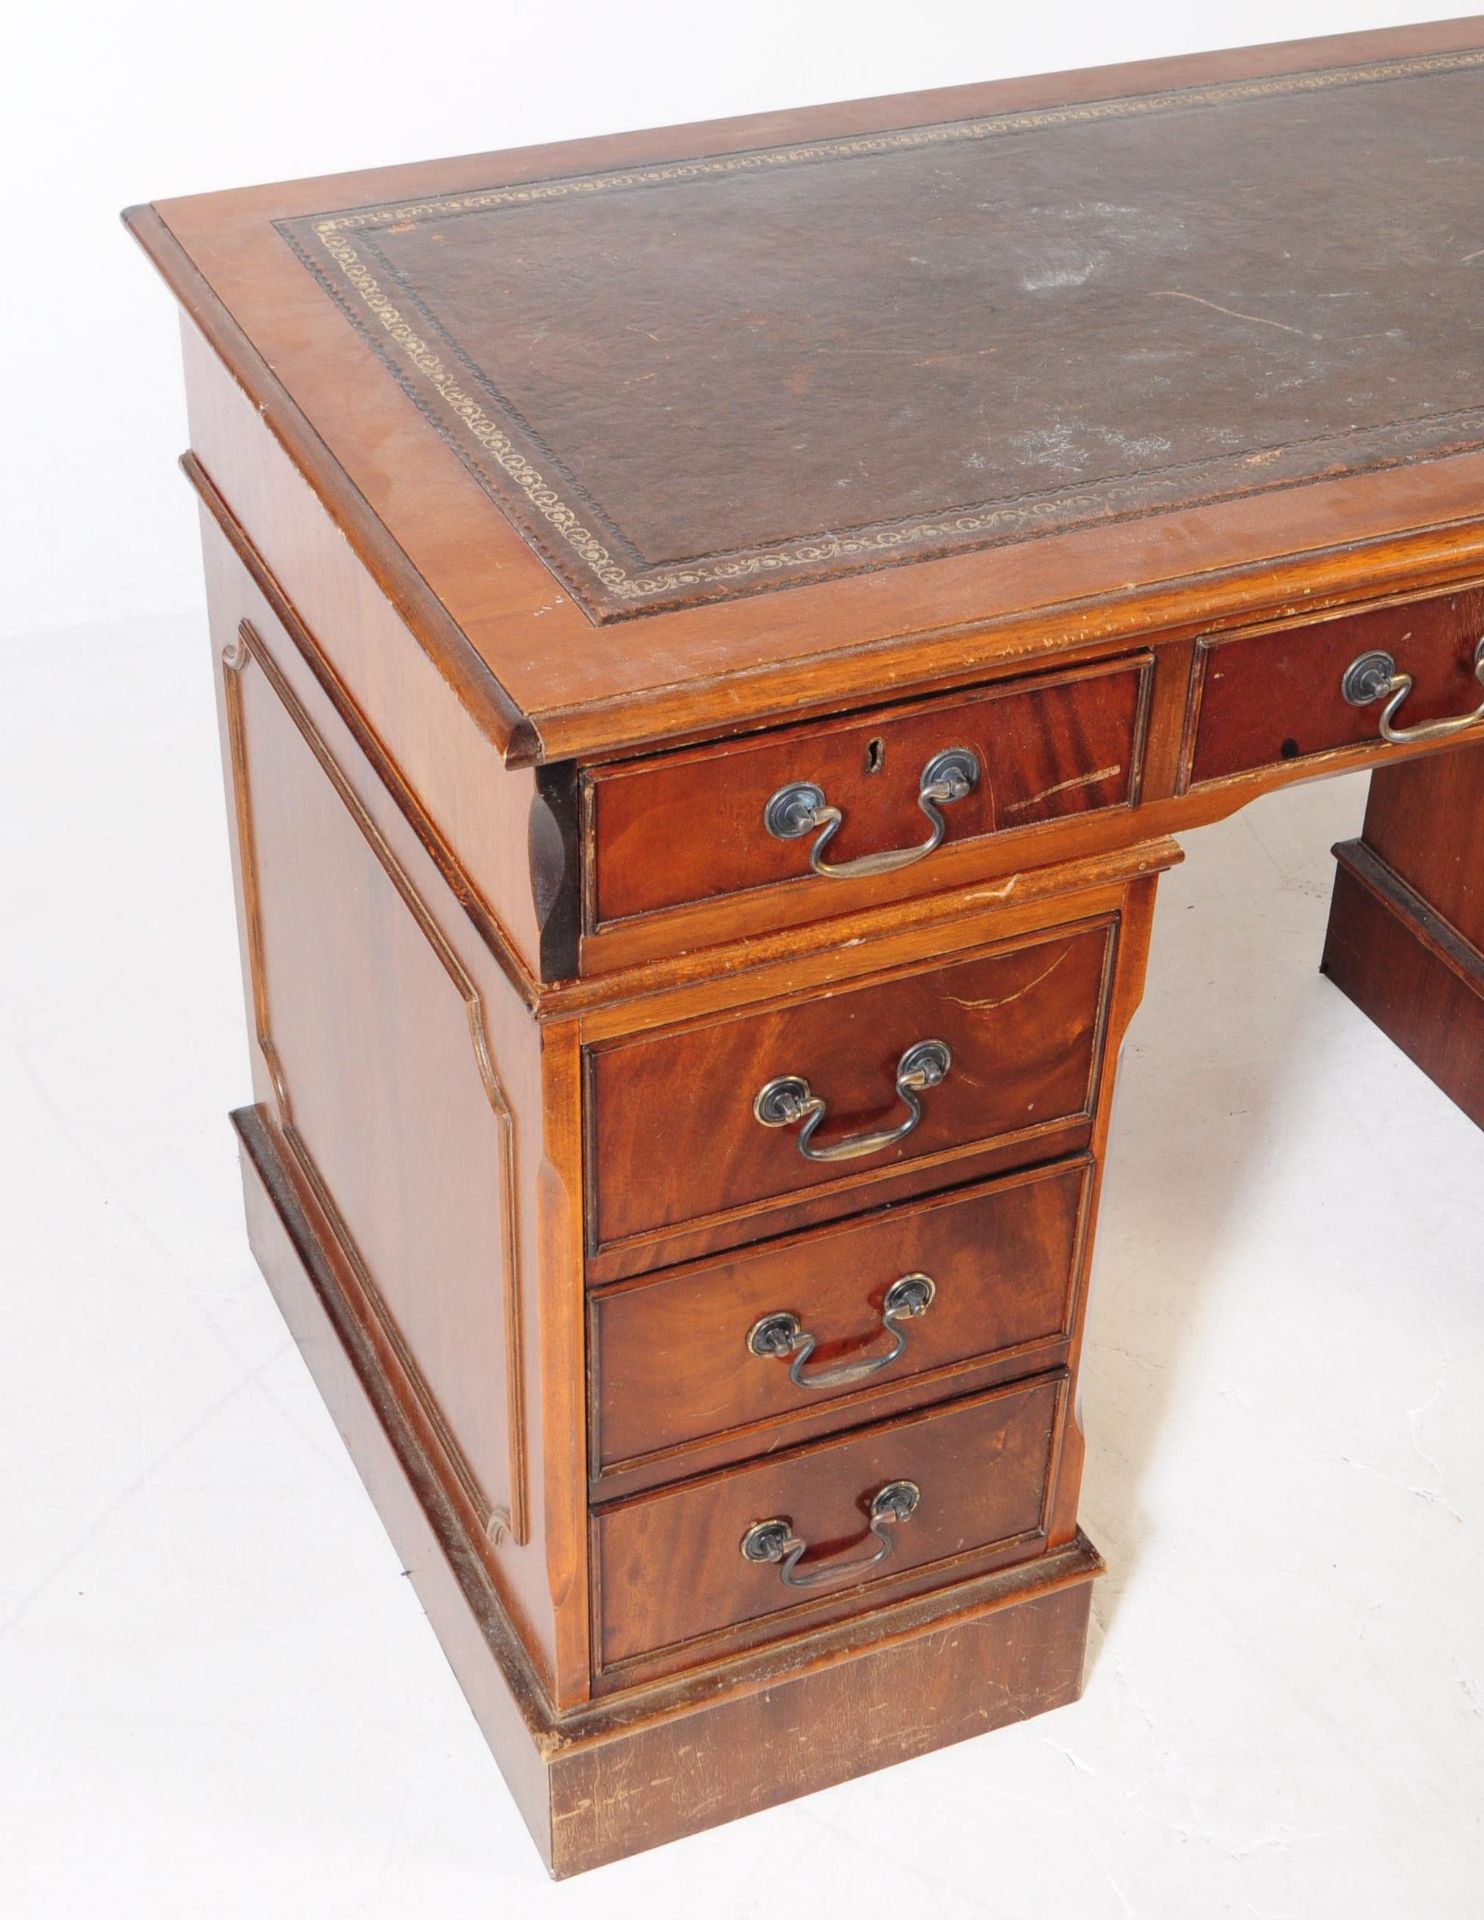 GEORGE III REVIVAL REPRODUCTION MAHOGANY OFFICE DESK - Image 3 of 8